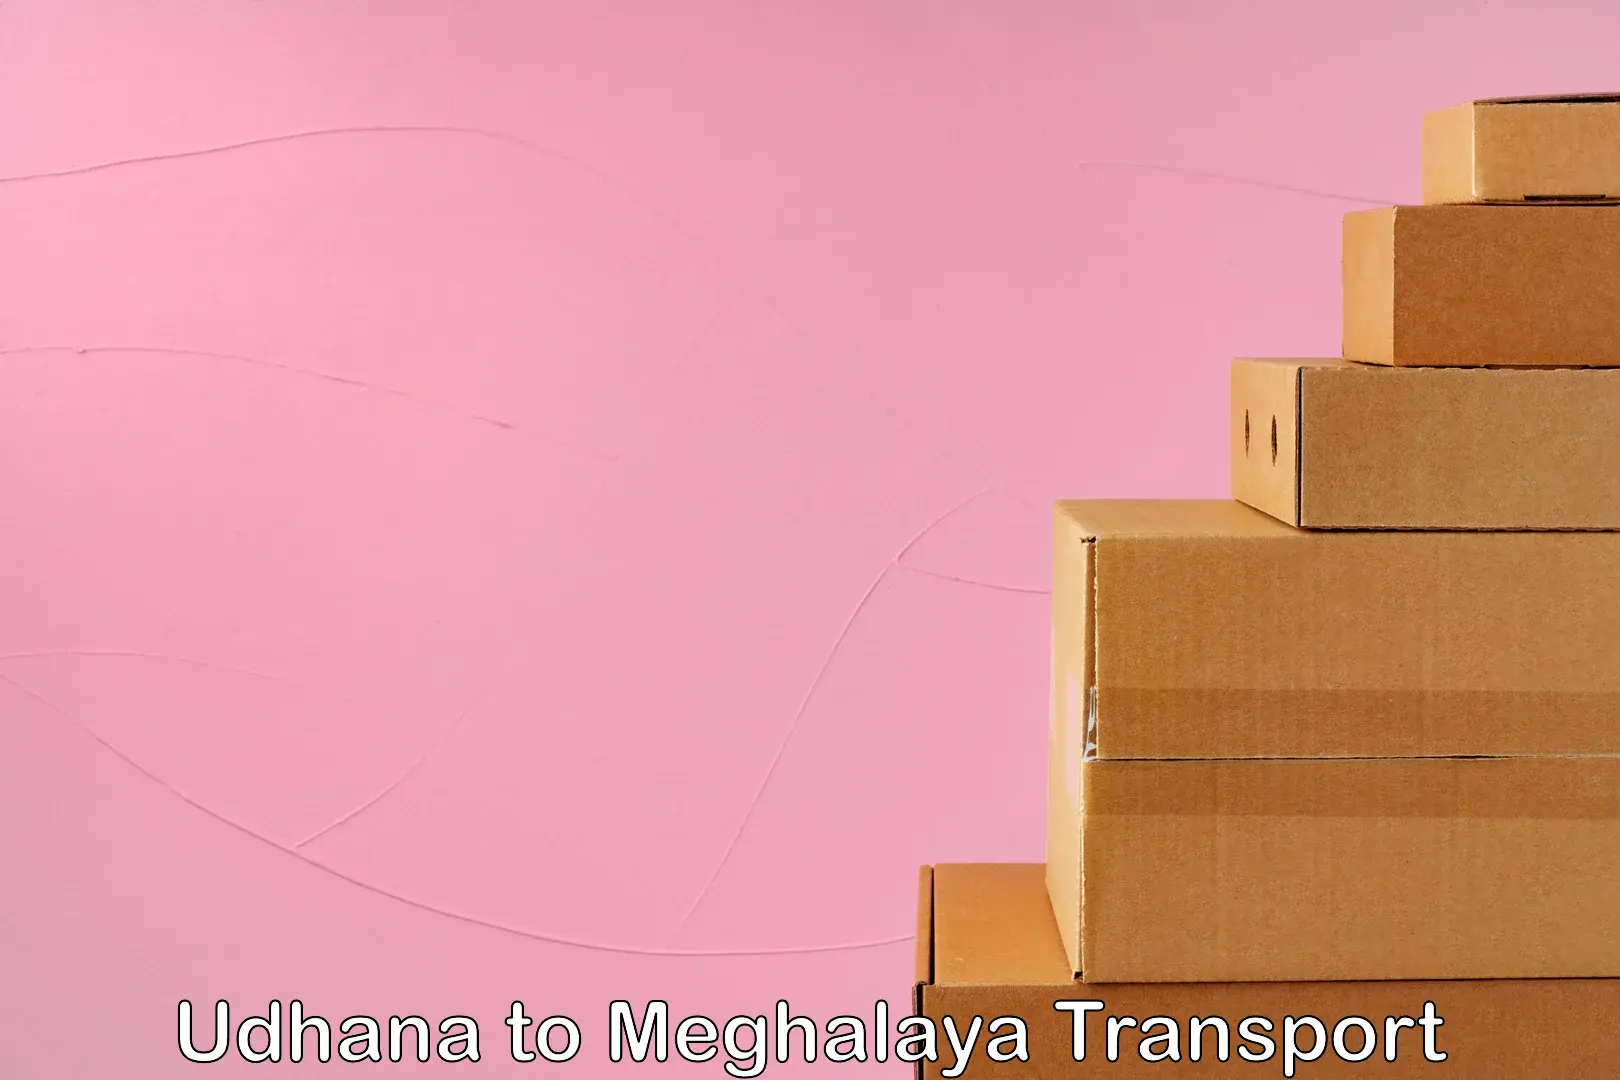 Lorry transport service Udhana to Shillong